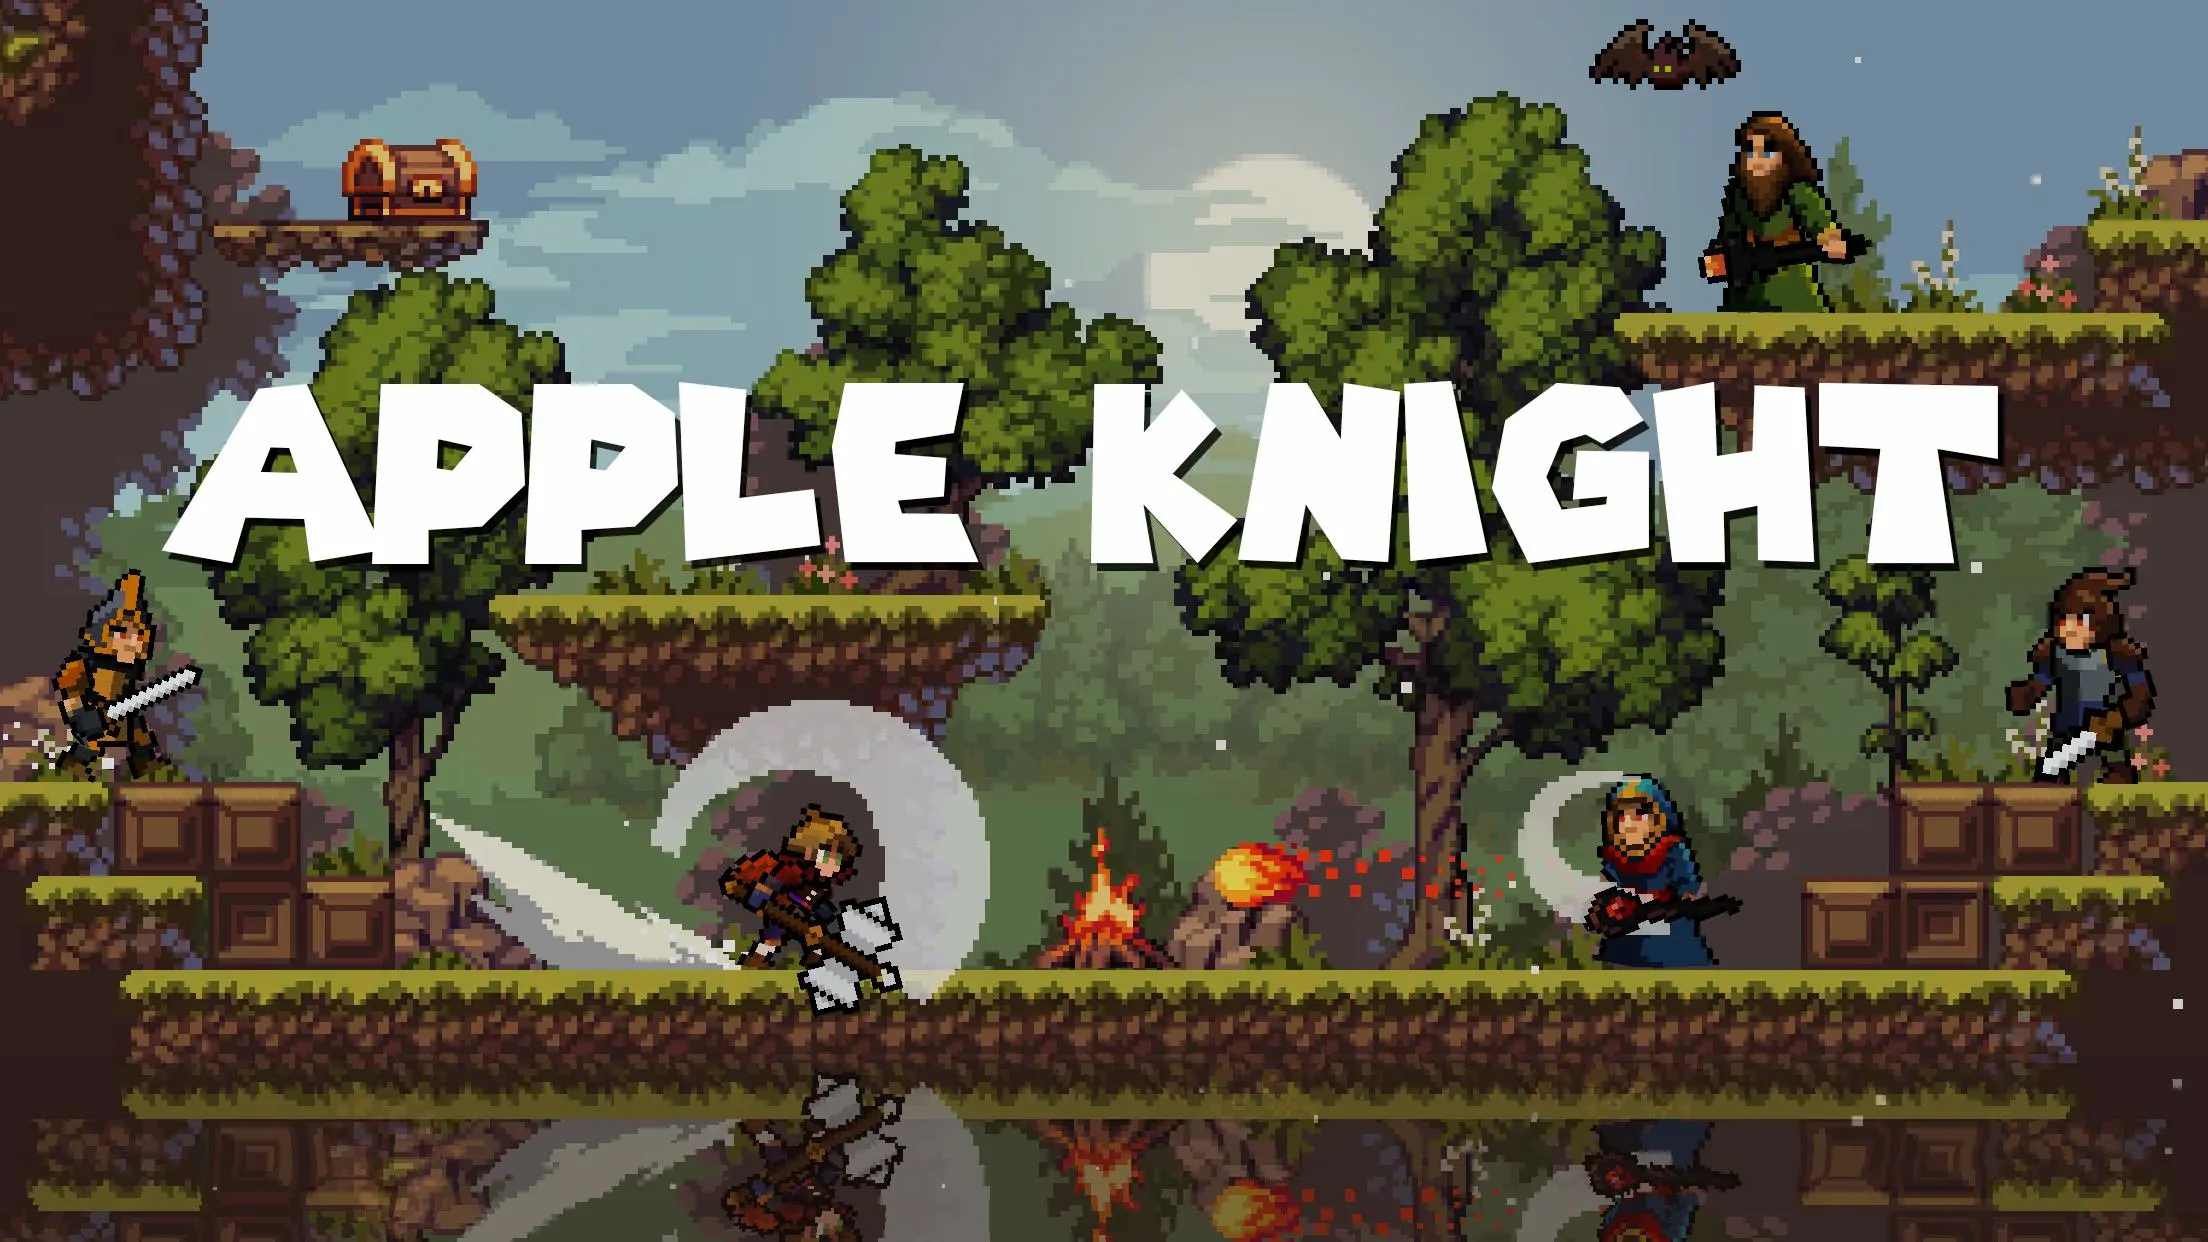 Download Apple Knight Action Platformer android on PC